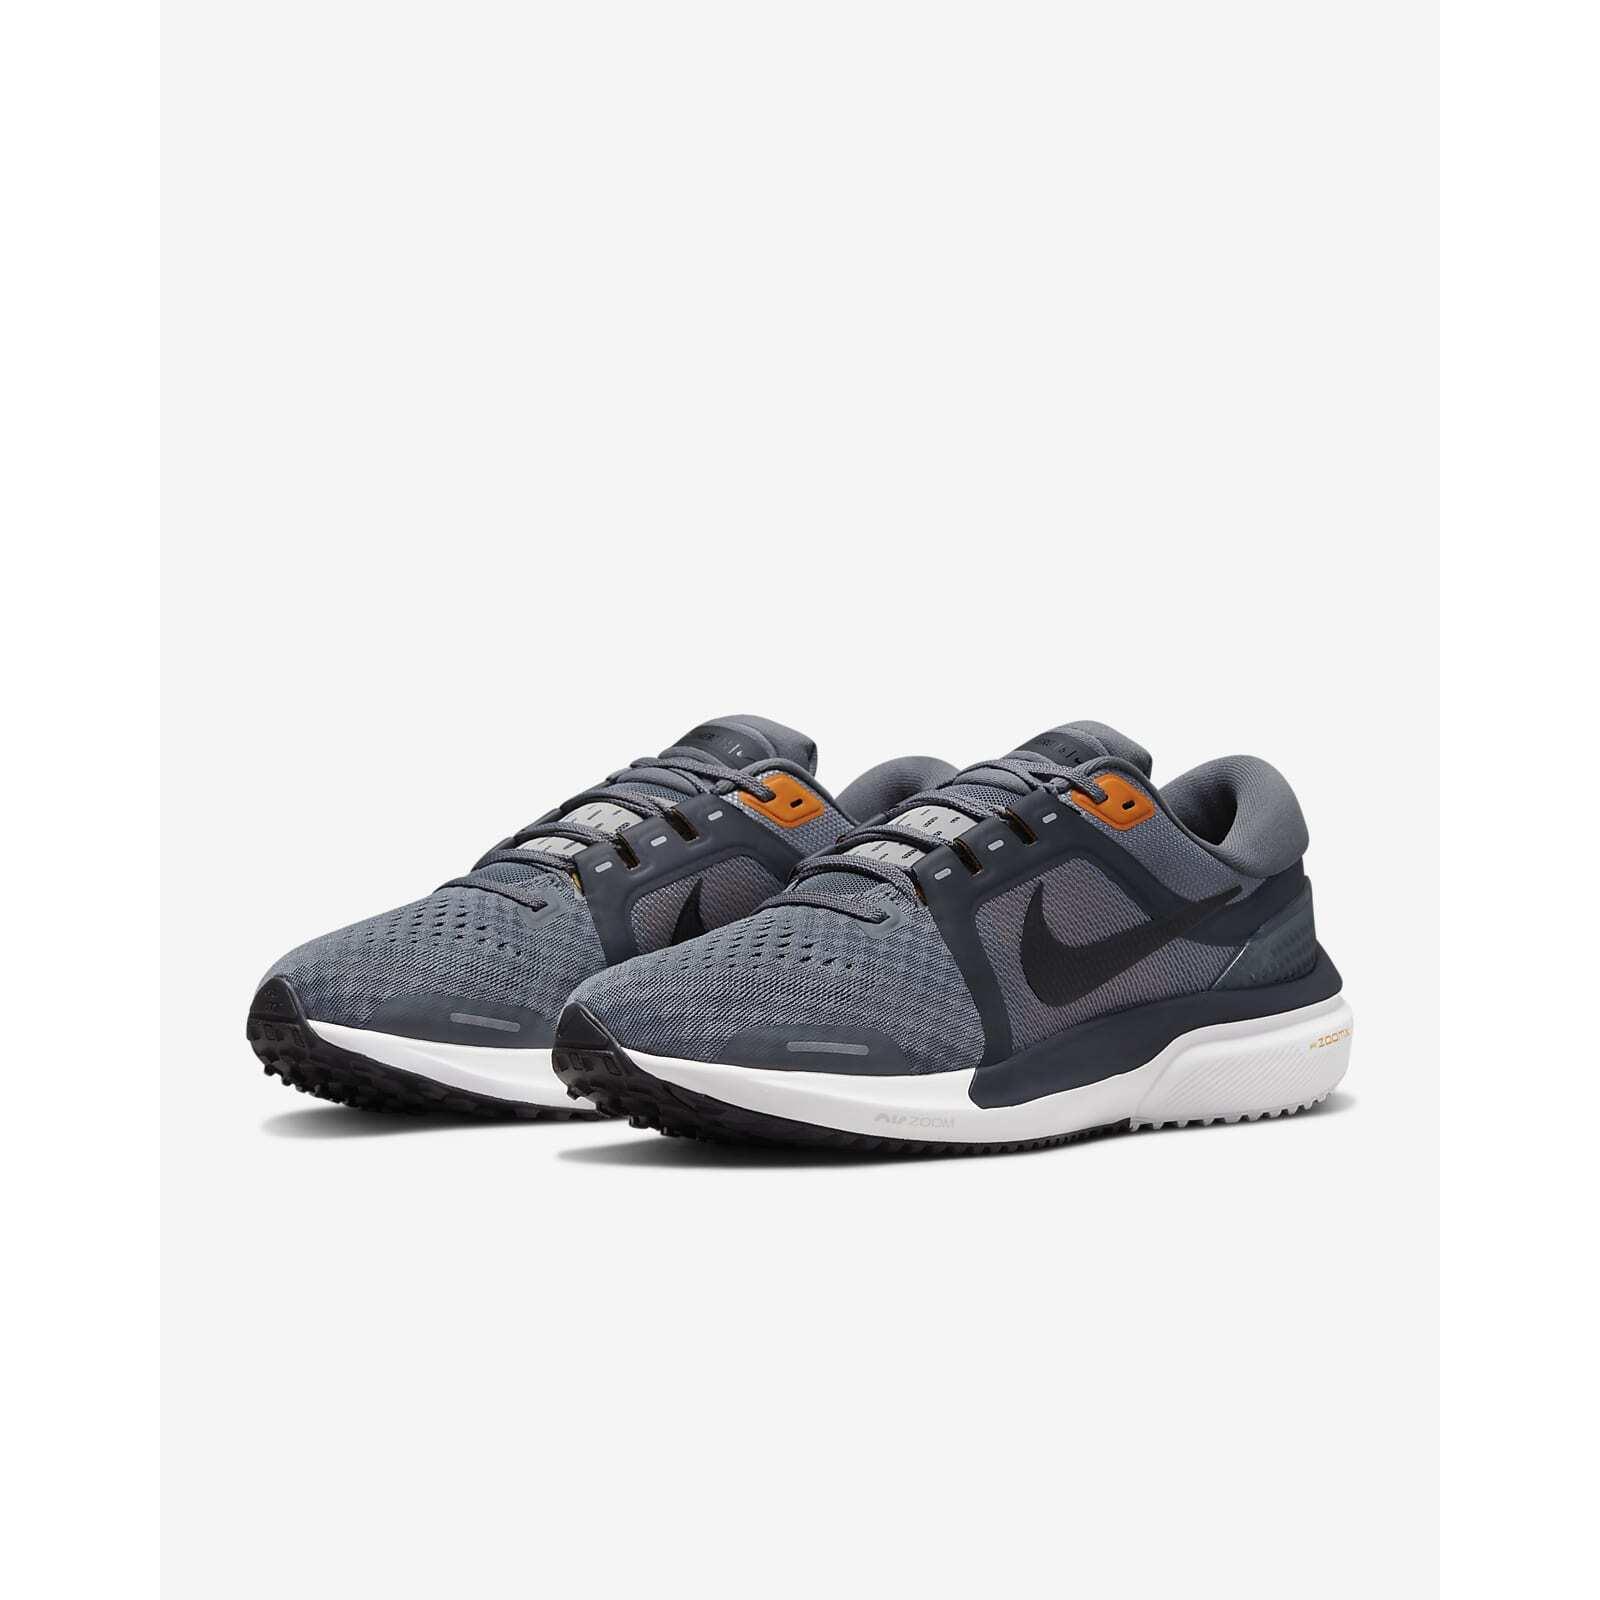 Nike shoes Air Zoom Vomero - Cool Grey Black Anthracite 0